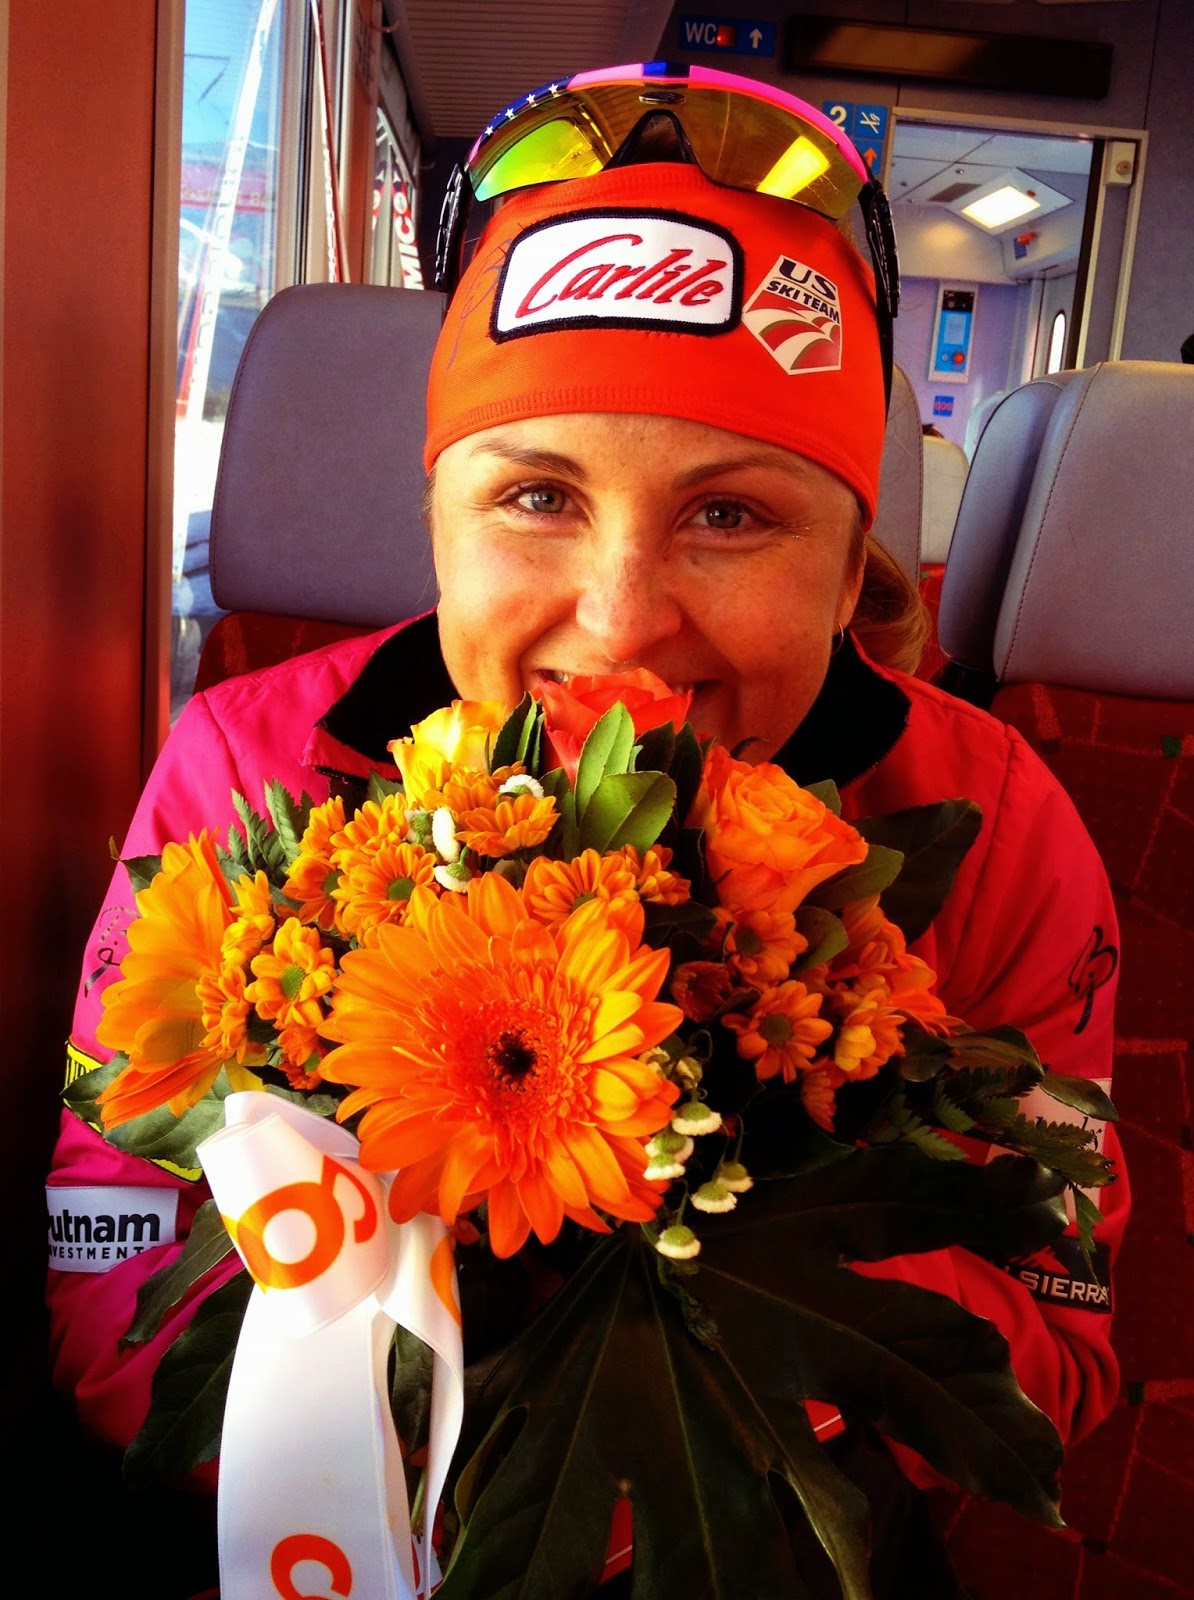 Holly Brooks after placing fourth in the 2014 Engadin Ski Marathon in March in Switzerland. (Courtesy photo/HollySkis.blogspot.com) http://hollyskis.blogspot.com/2014/03/home-sweet-home.html